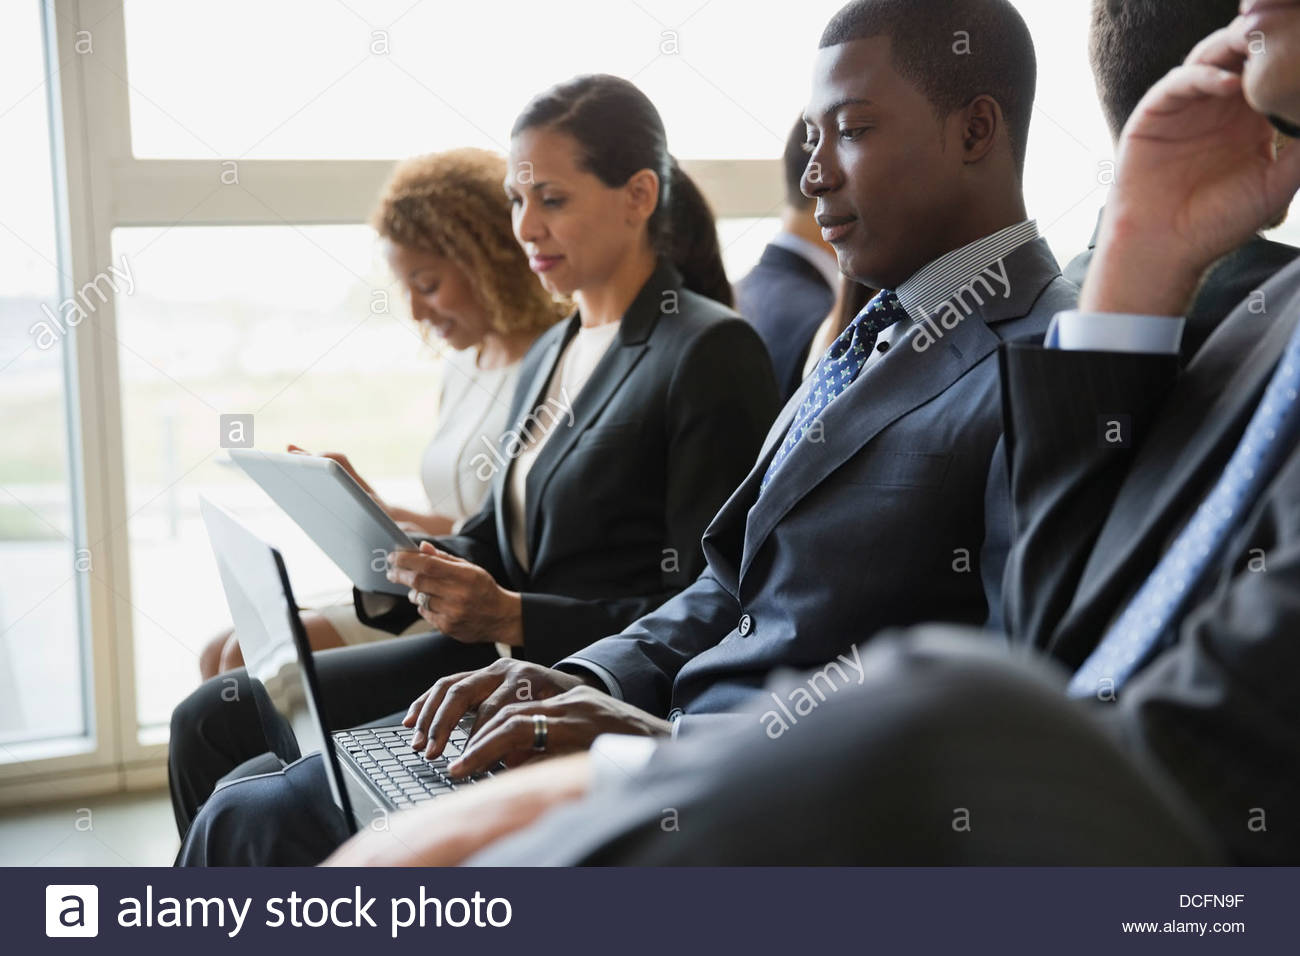 Group of business people using smart devices Stock Photo